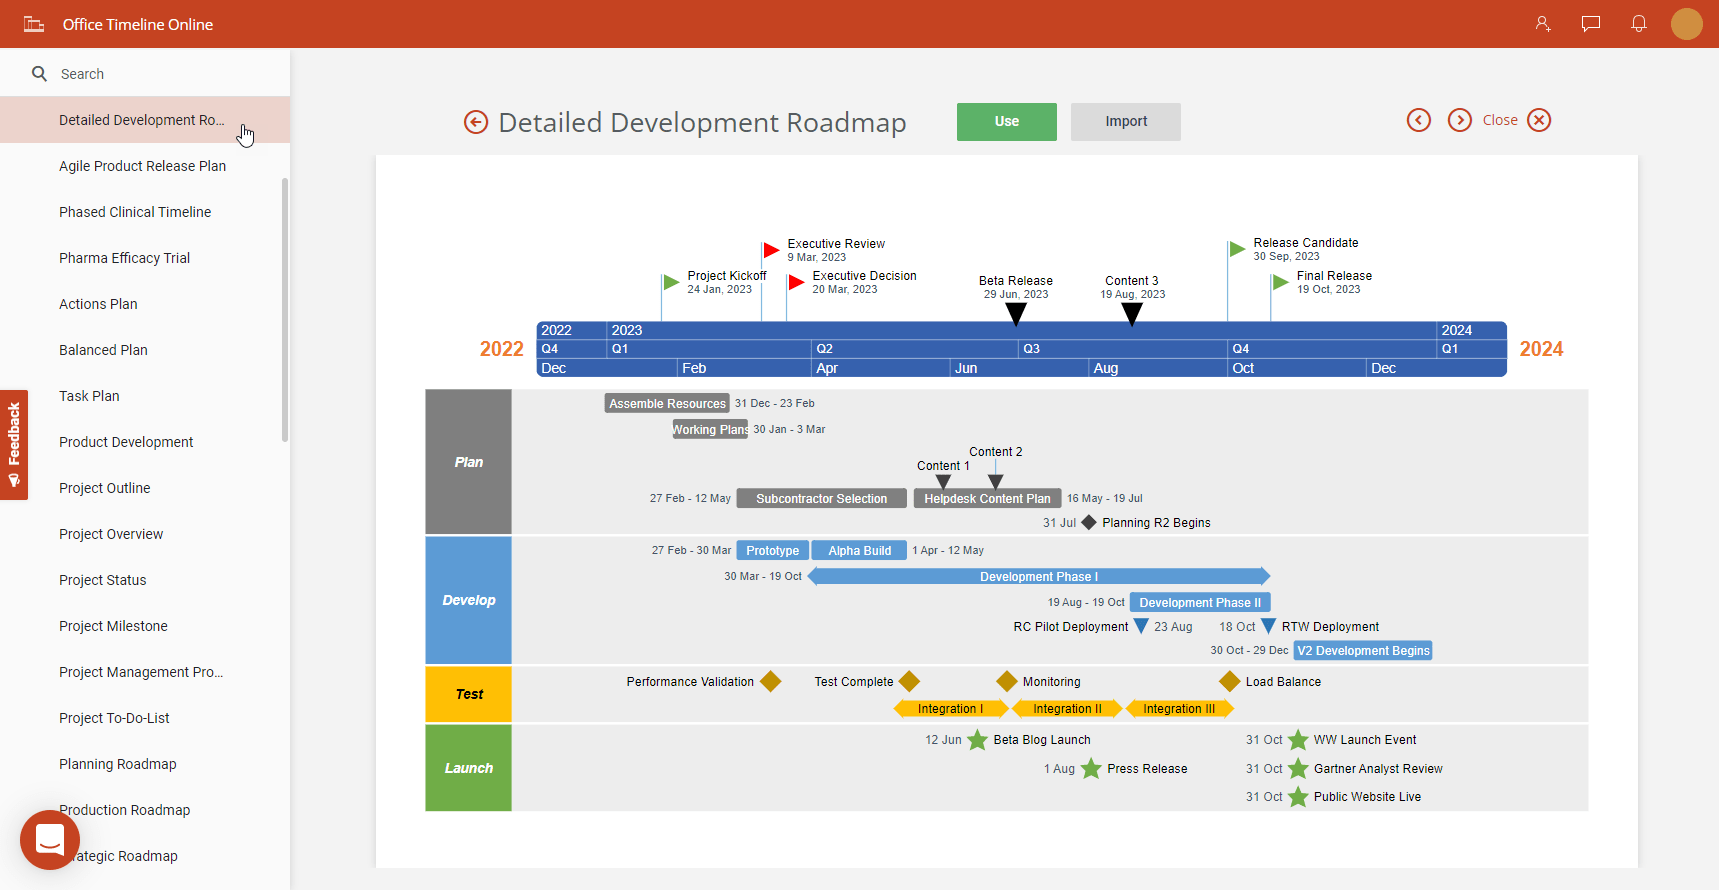 Template preview in Office Timeline Online